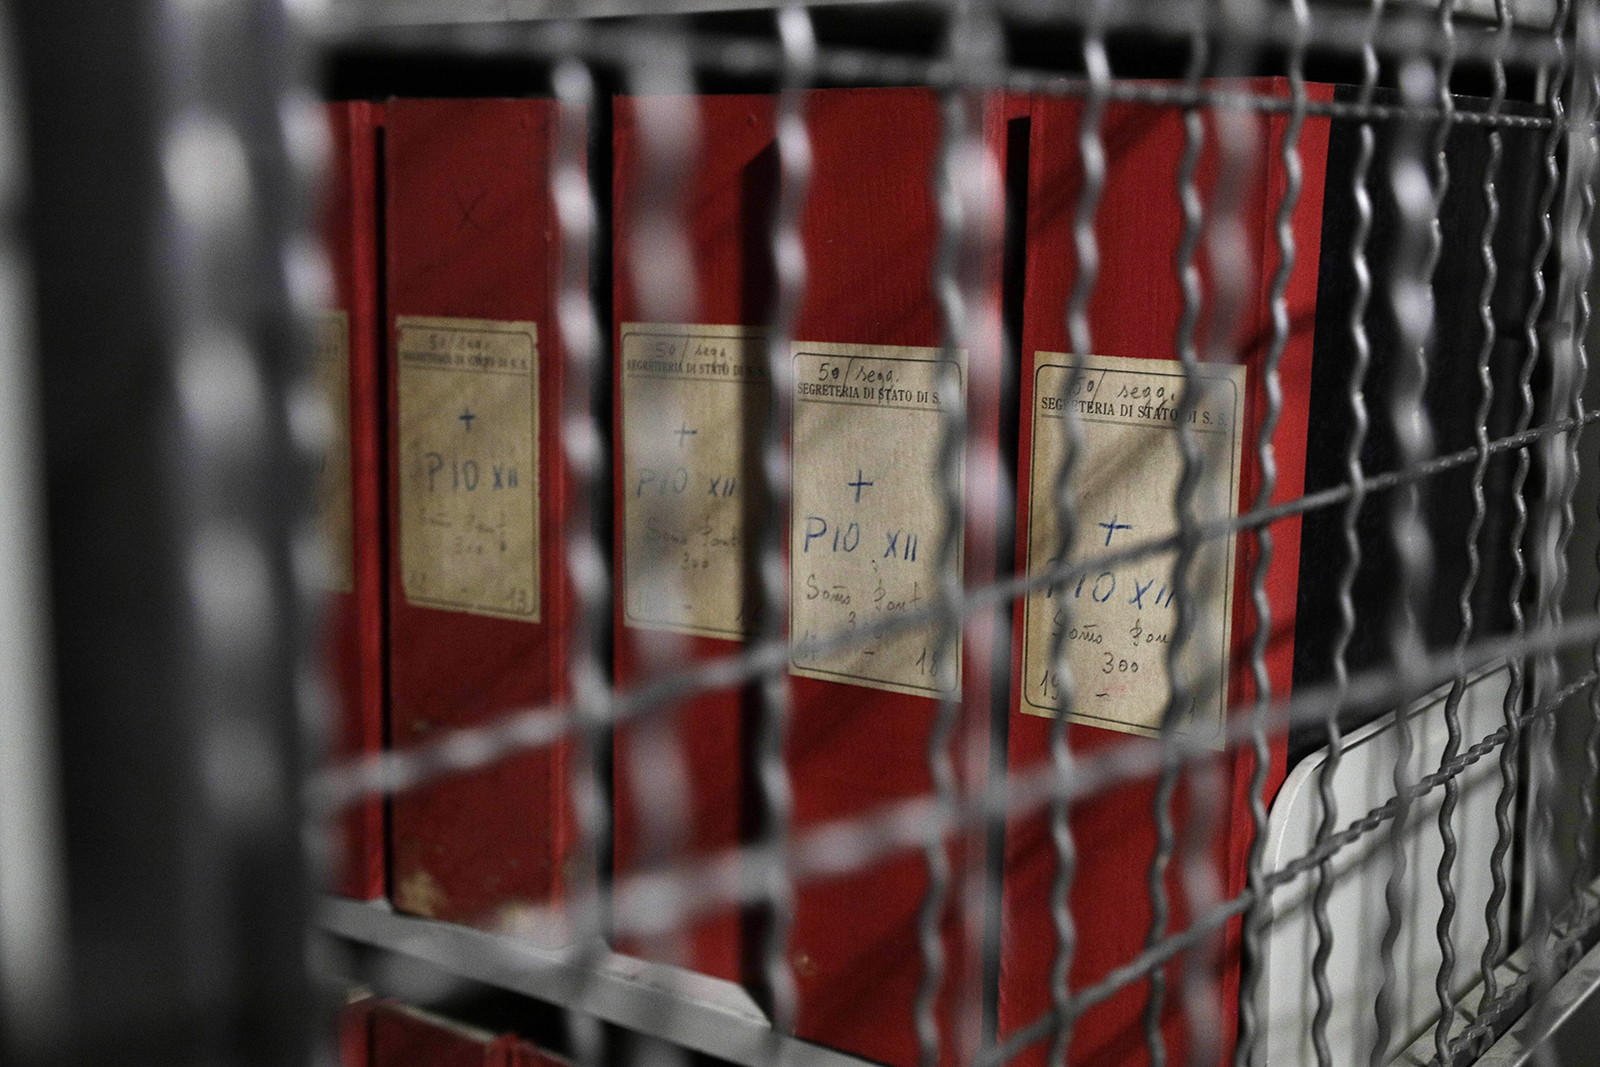 Folders marked with labels reading “Pius XII" are seen through a grating during a guided tour for media of the Vatican library on Pope Pius XII, at the Vatican, Thursday, Feb. 27, 2020. The Vatican’s apostolic library on Pope Pius XII, the World War II-era pope and his record during the Holocaust, opened to researchers on March 2, 2020. (AP Photo/Gregorio Borgia)